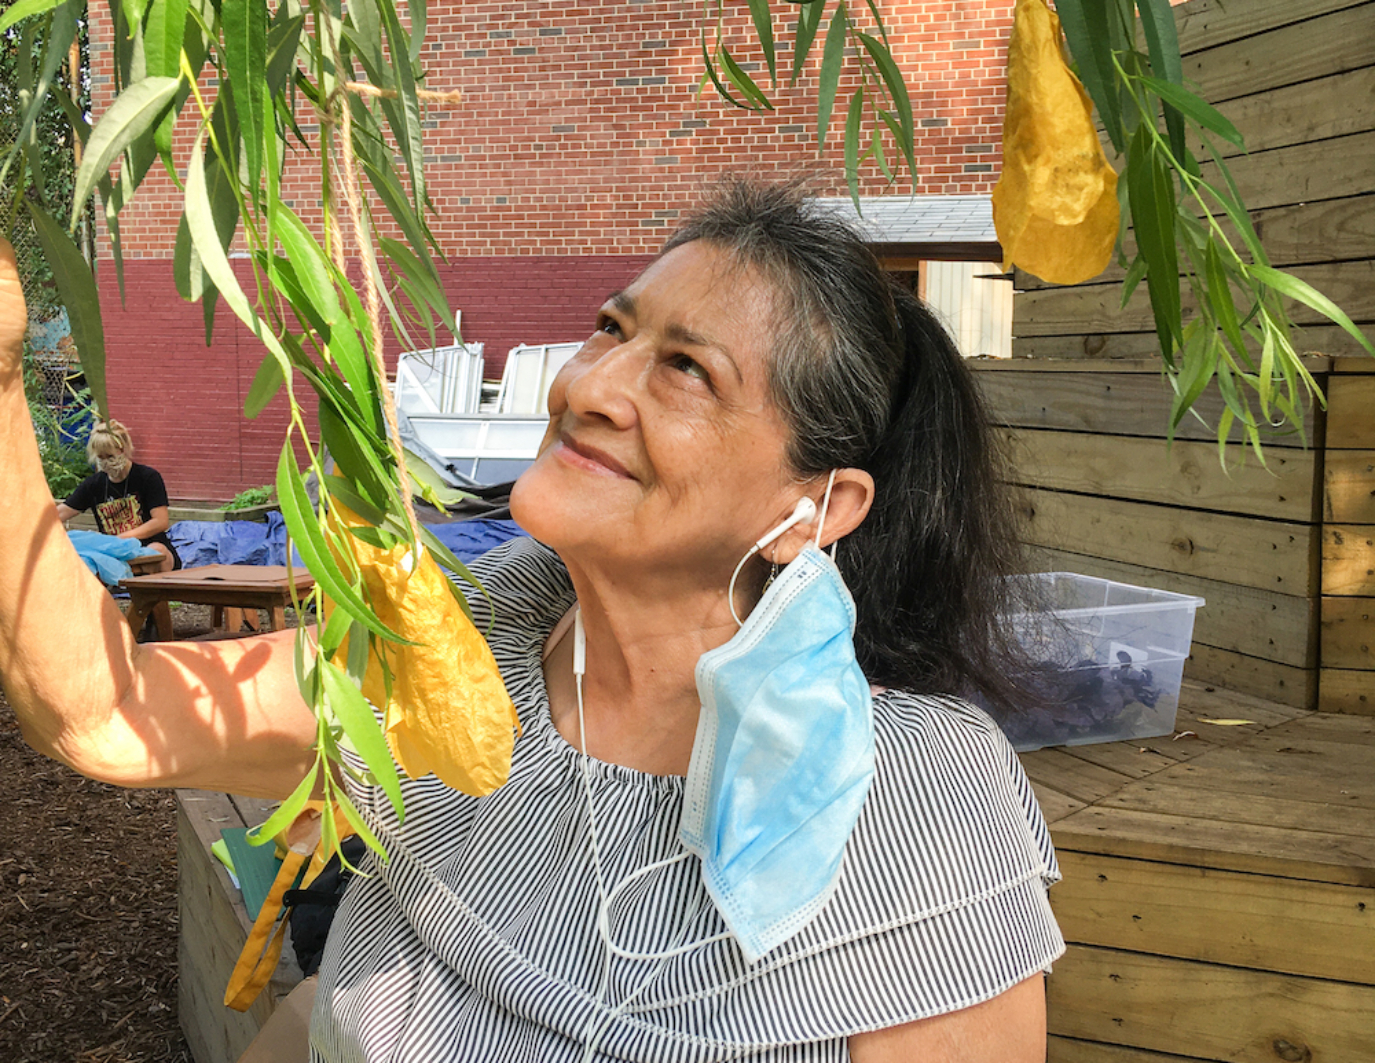 A volunteer looks up at the finished yellow flowers that are hung in the trees to dry, with a smile on her face. She has headphone in her ears and a mask hanging from her left ear. Some gray hair, and shirt striped in black and white. She appears content. This is the NYC event.